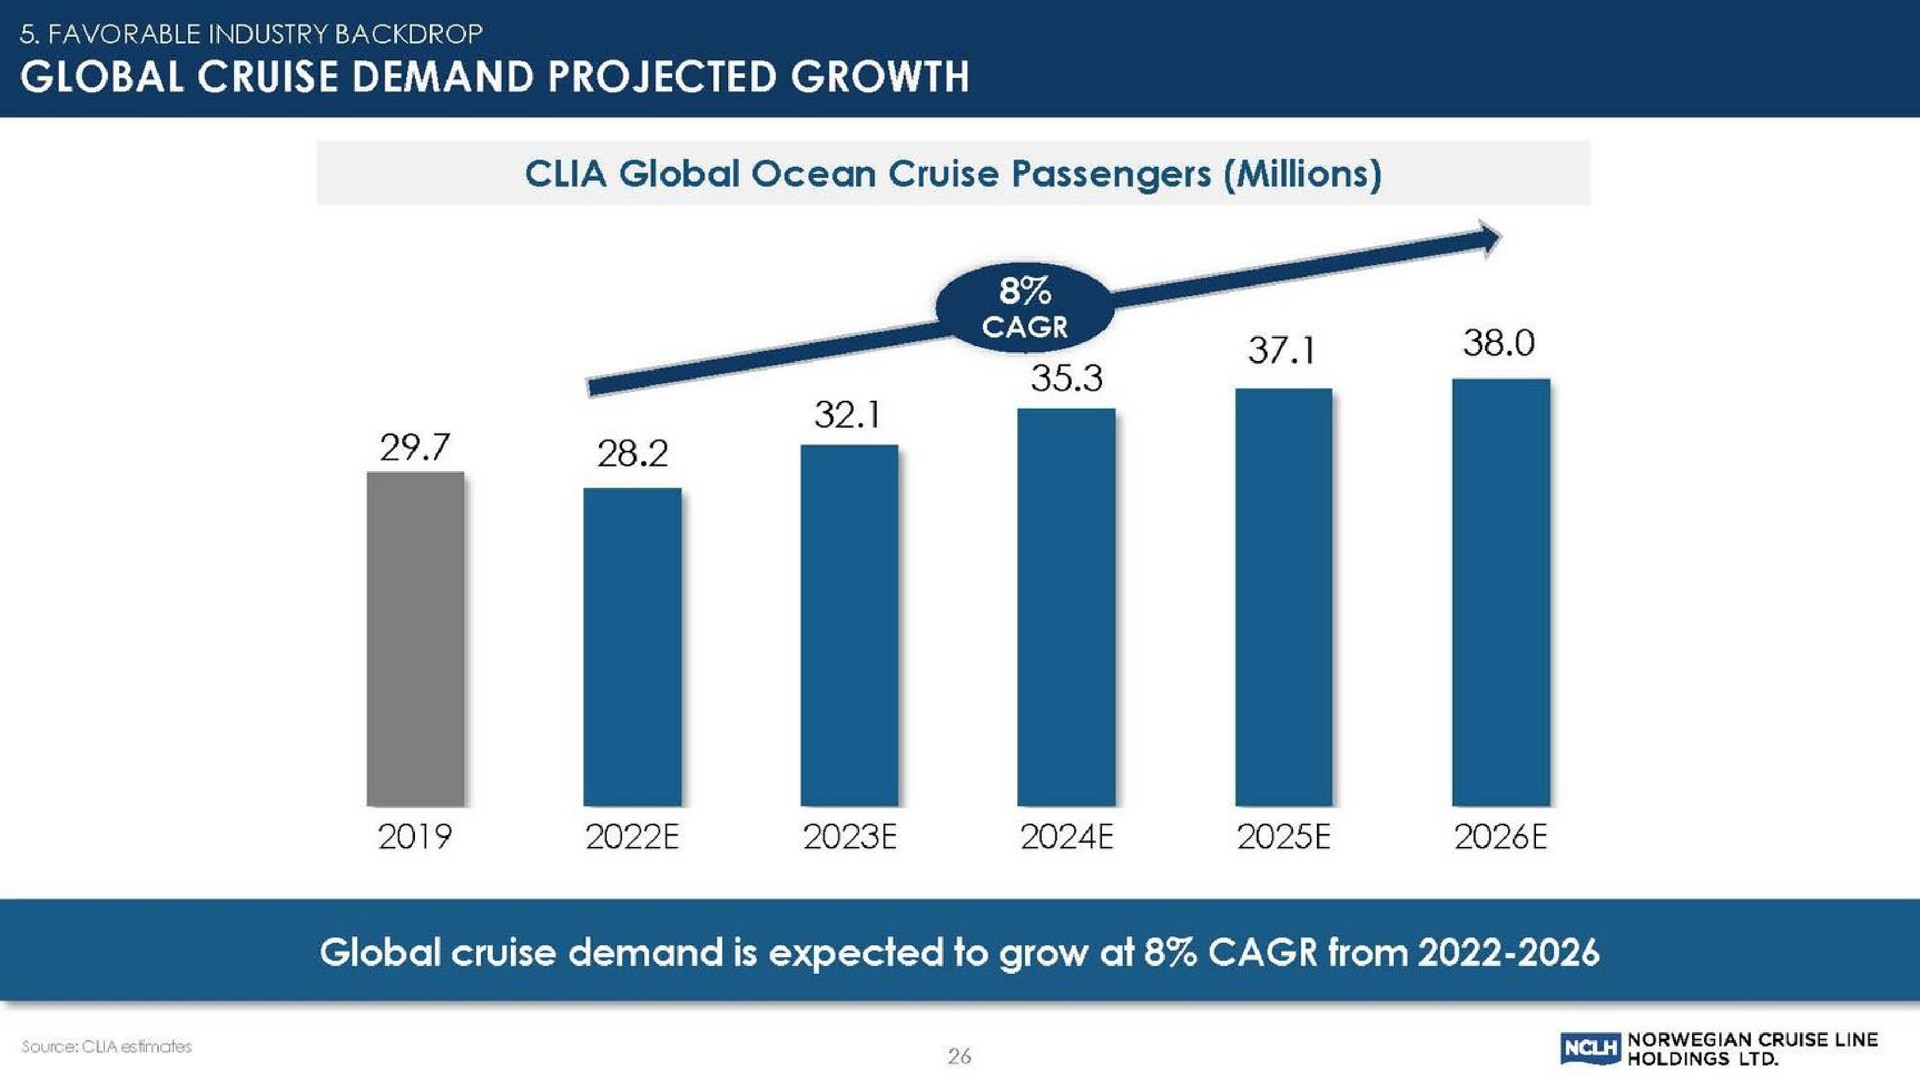 global cruise demand projected growth | Norwegian Cruise Line